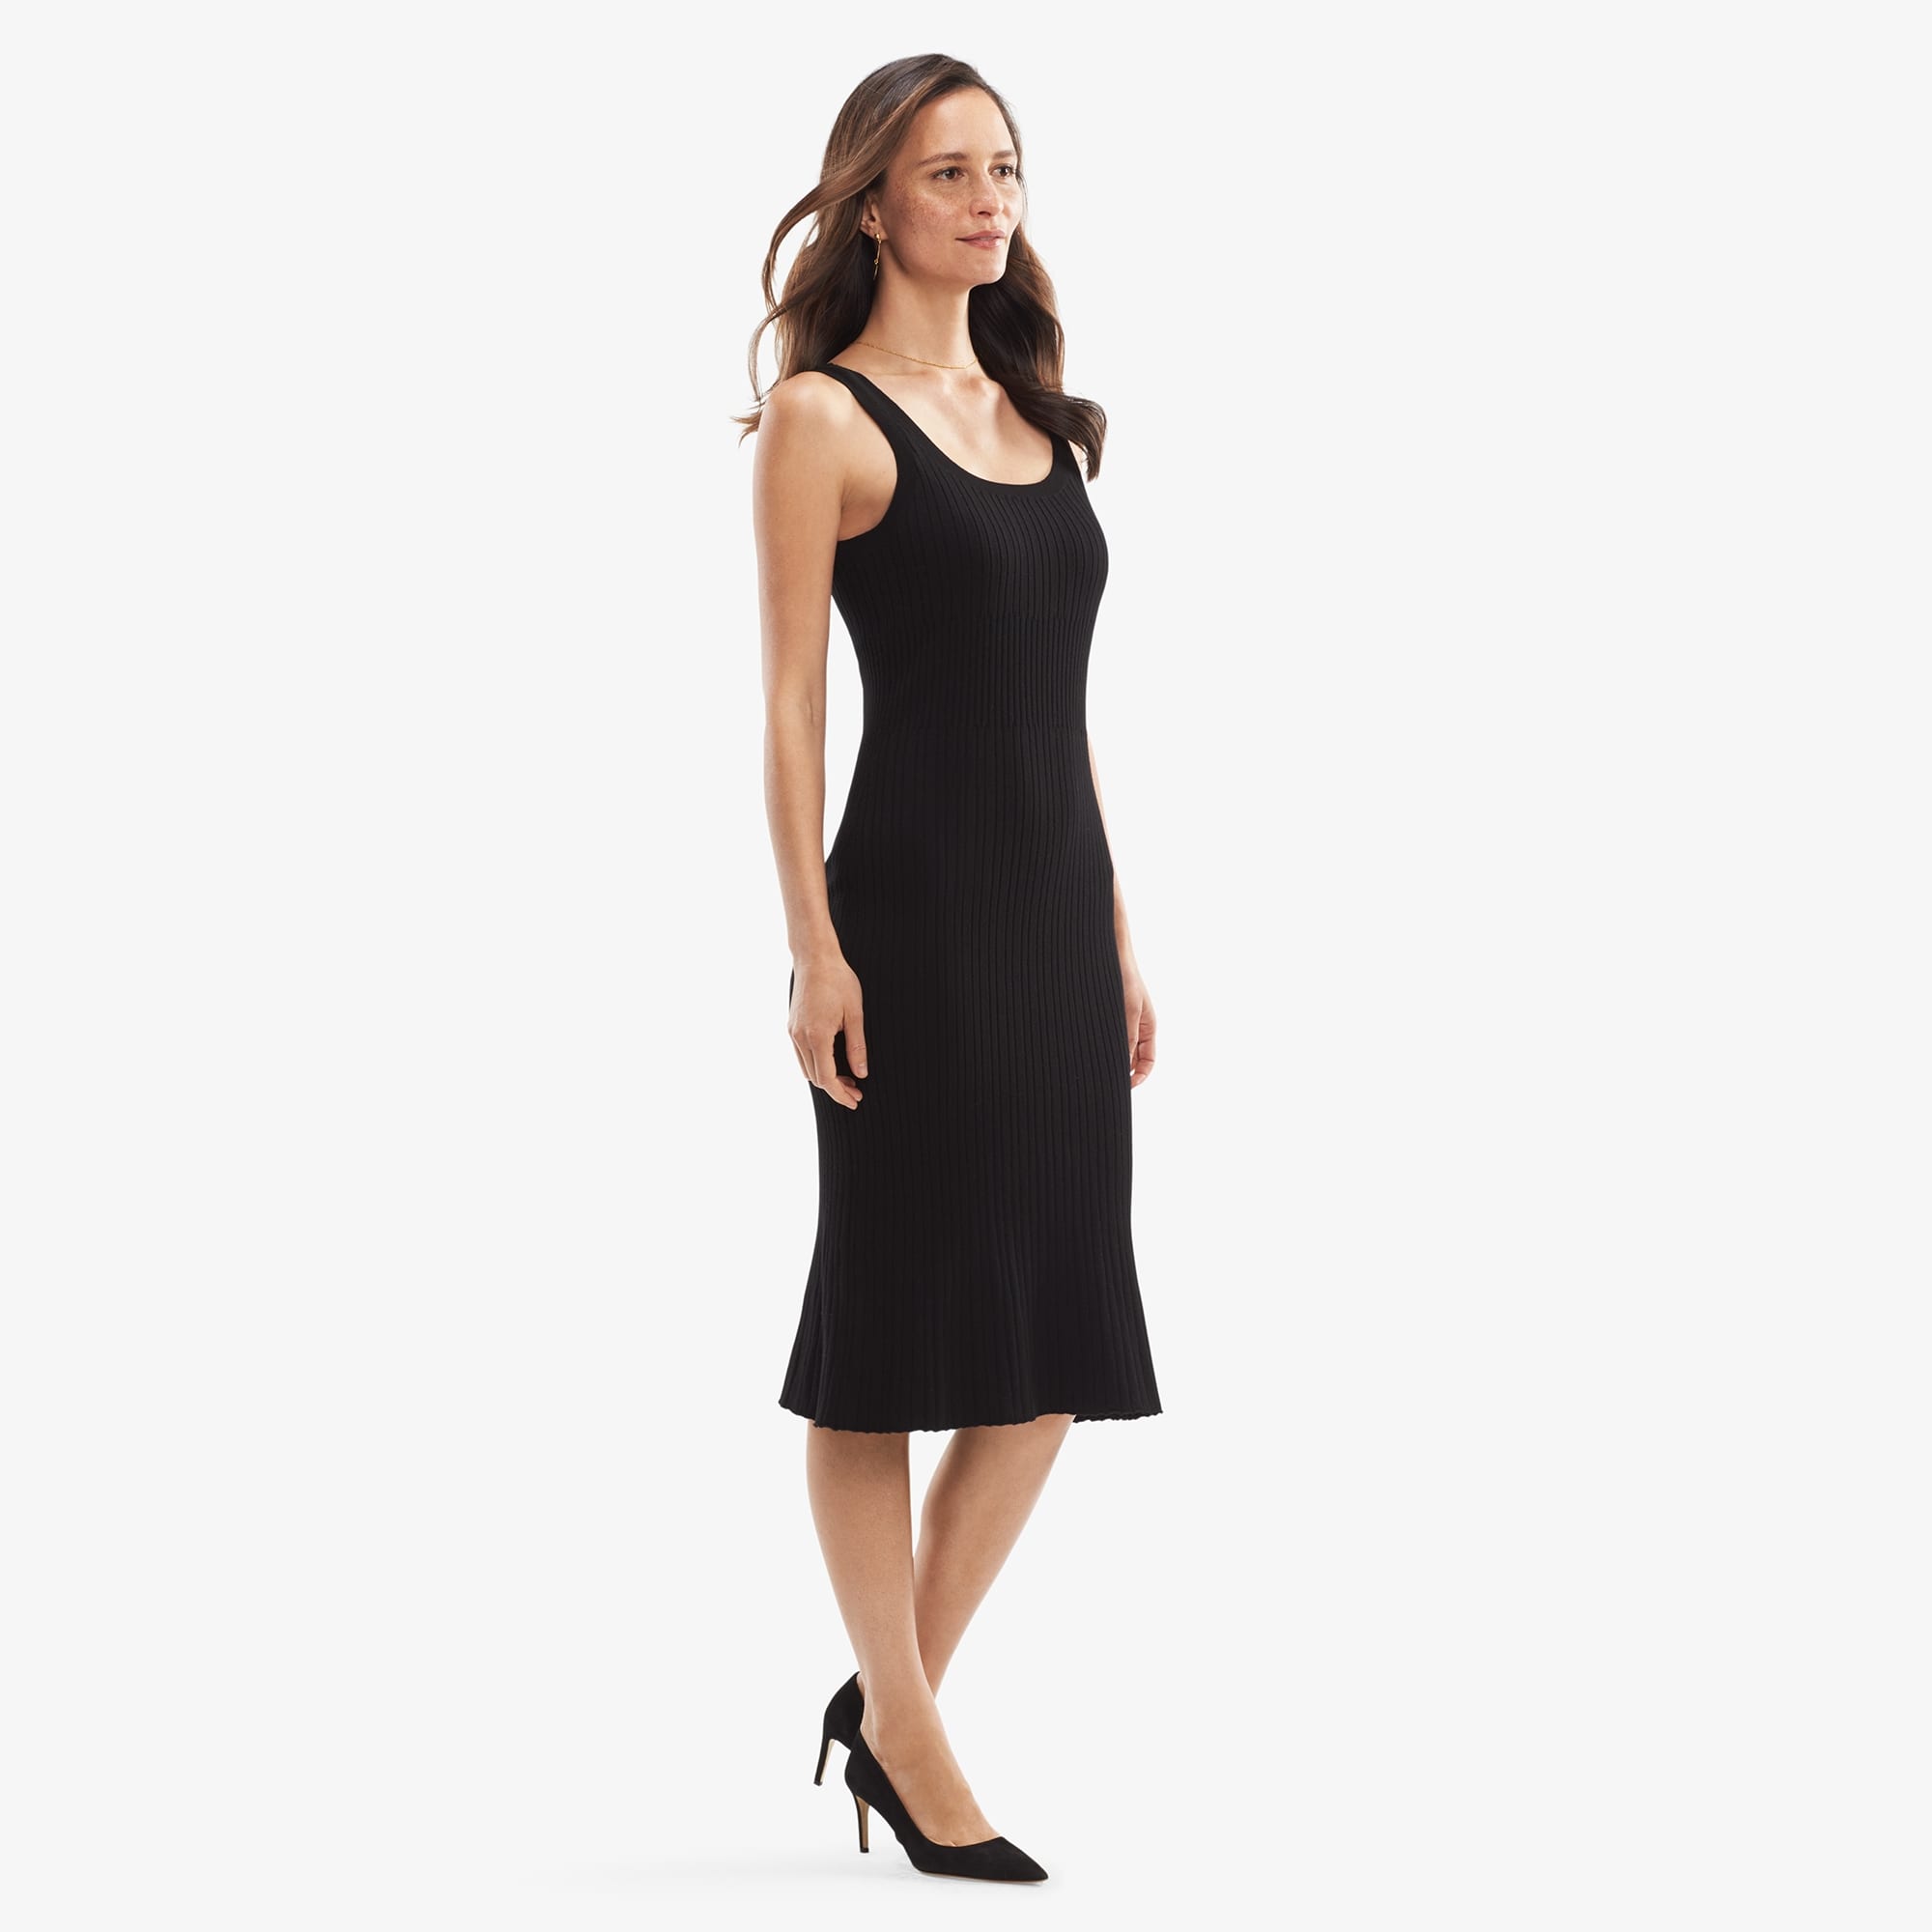 Side image of a woman standing wearing the Gwen Dress in Black